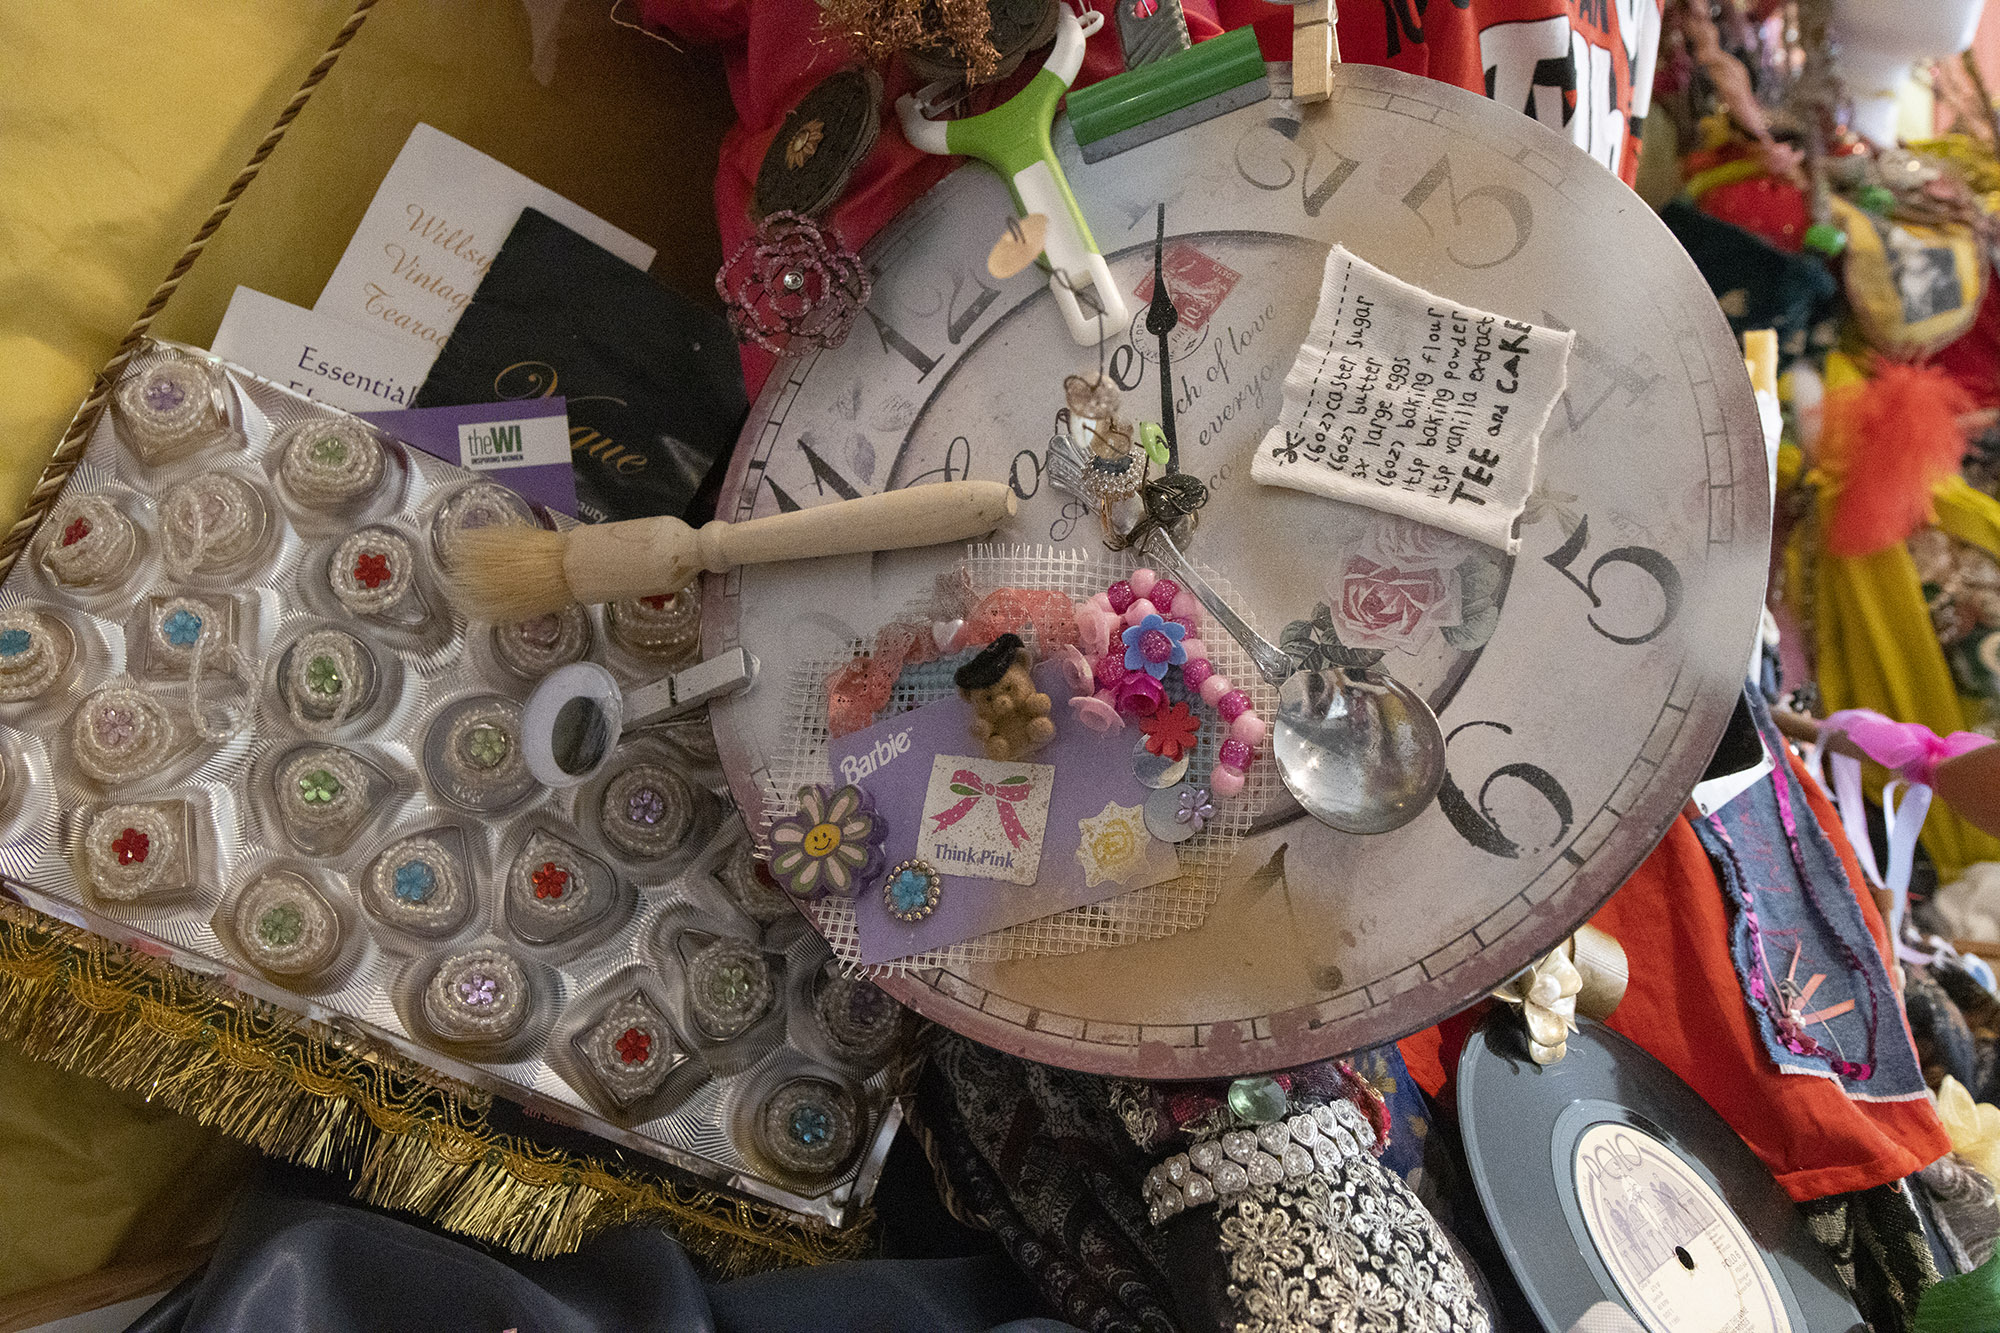 A secret of a sculpture featuring a clock face decorated with objects including a pastry brush, Barbie accessories, a spoon, a vegetable peeler, a clothes peg and a small receipt for cake. Beside it is the plastic tray from a box of chocolates, filled with little beaded shapes. 